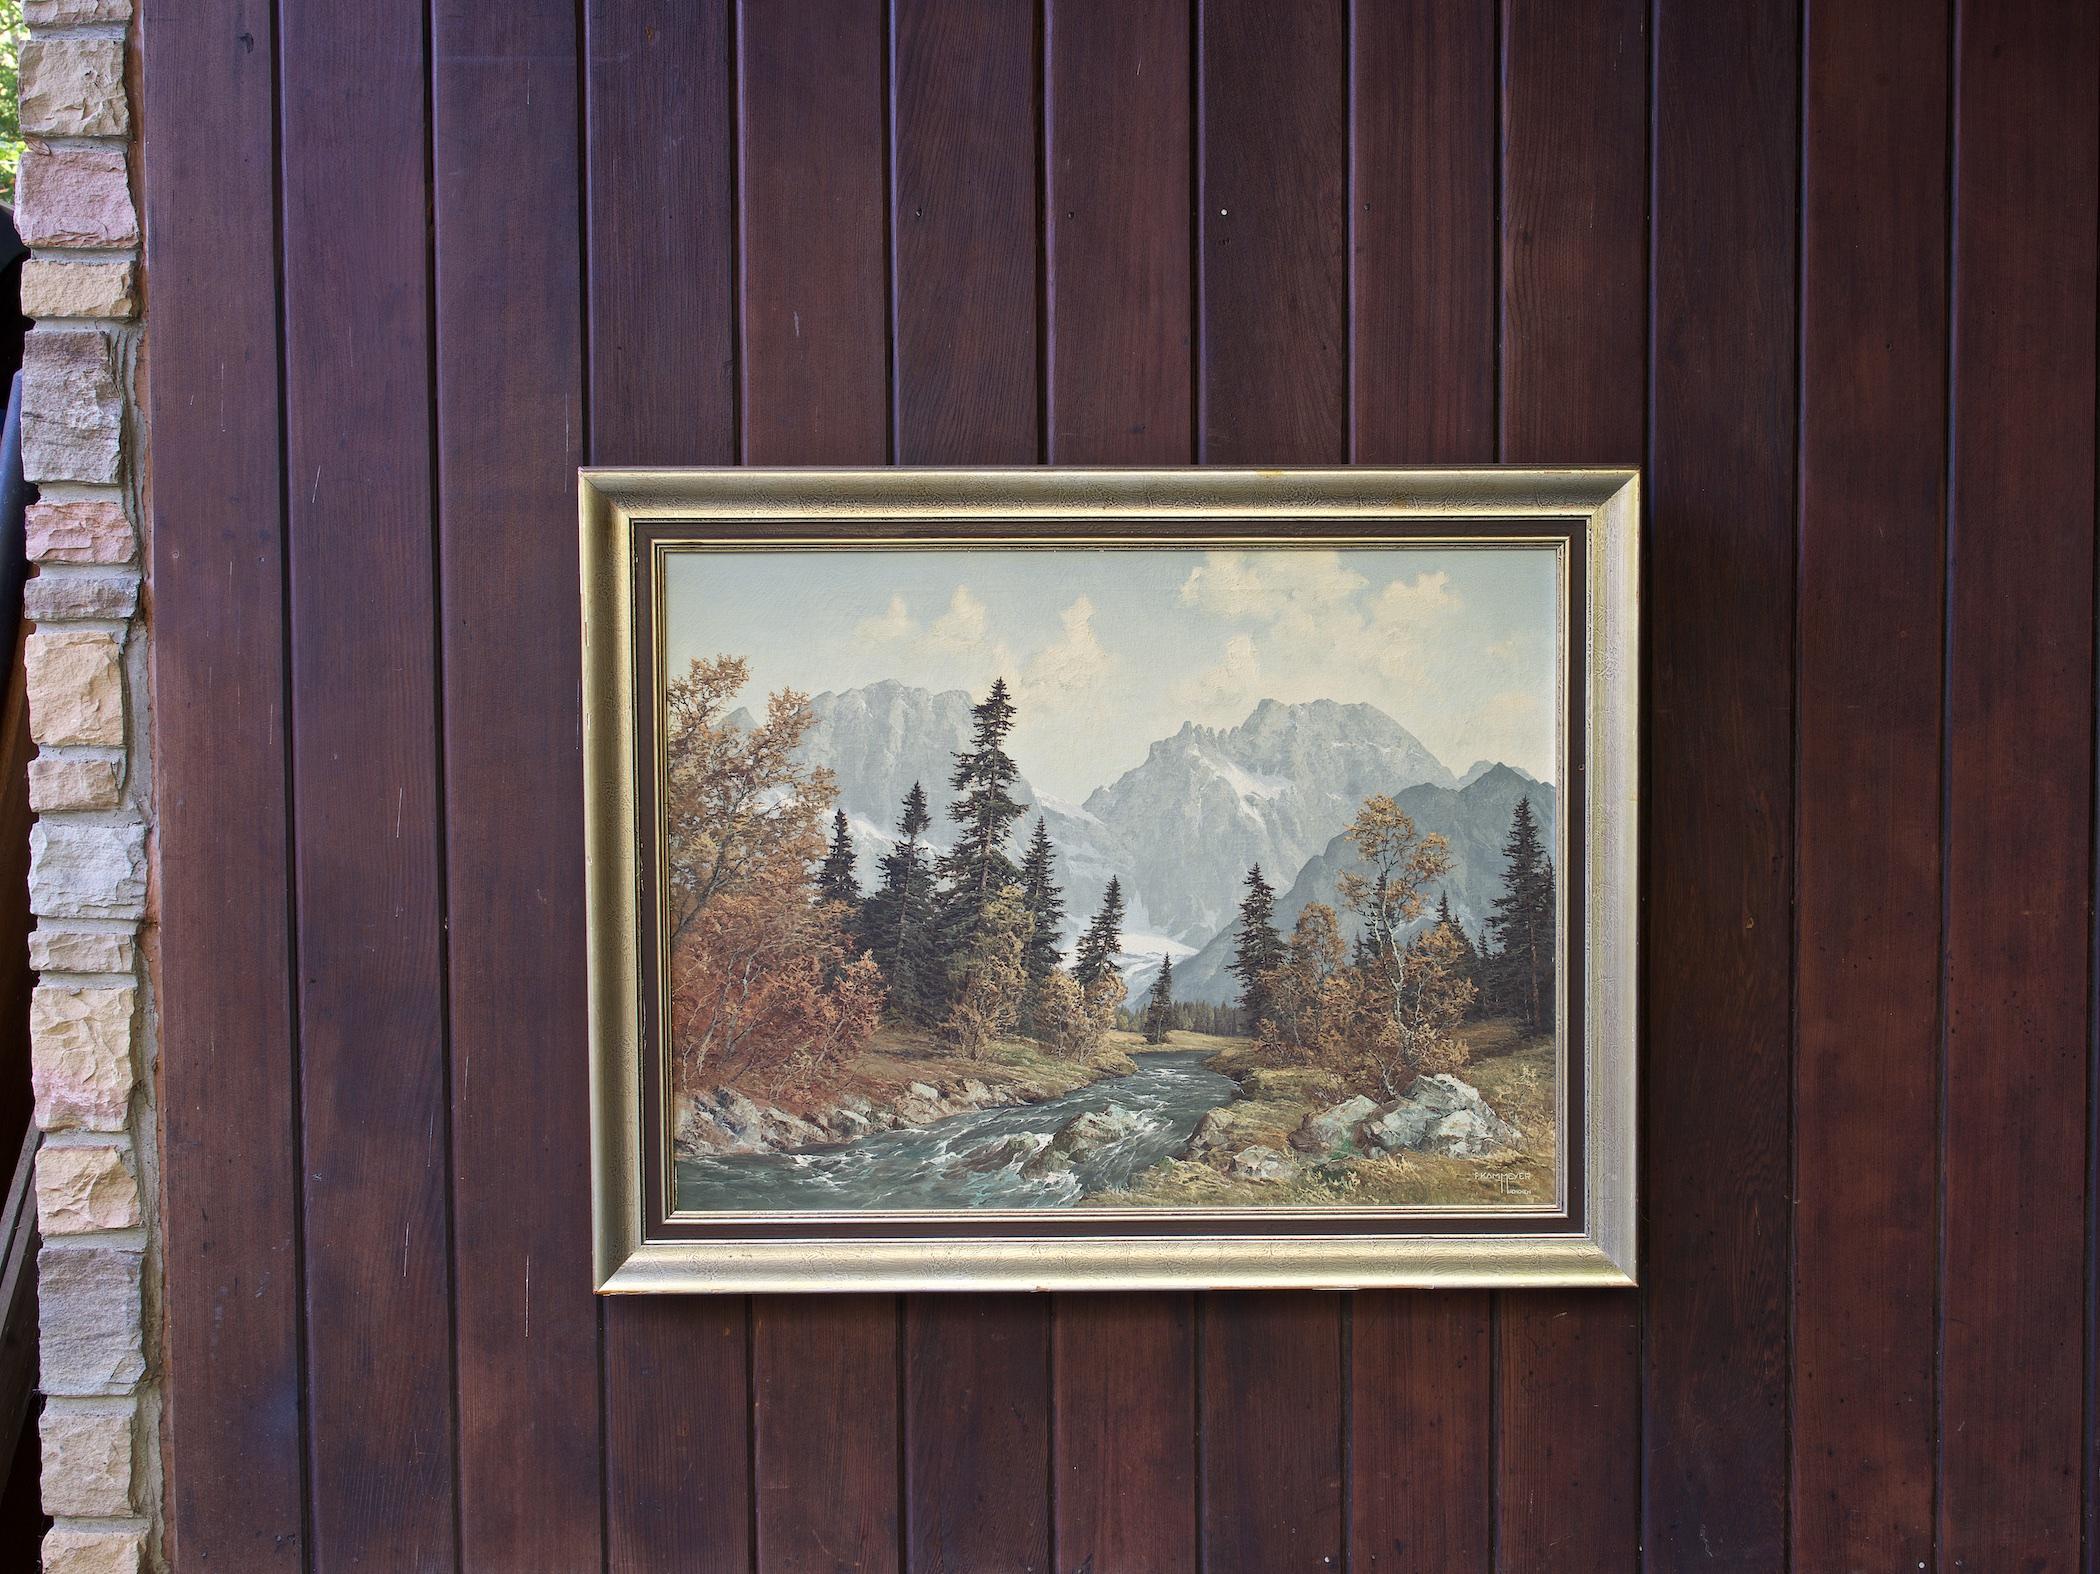 Fredrick Kammeyer, Muenchen (1873 - 1941)
Exact date of painting unknown. 

There is extensive chipping to thick paint on the frame, but the Canvas remains undamaged.

Frame W 37 x H 29 in.
Art W 31 x H 23 in.